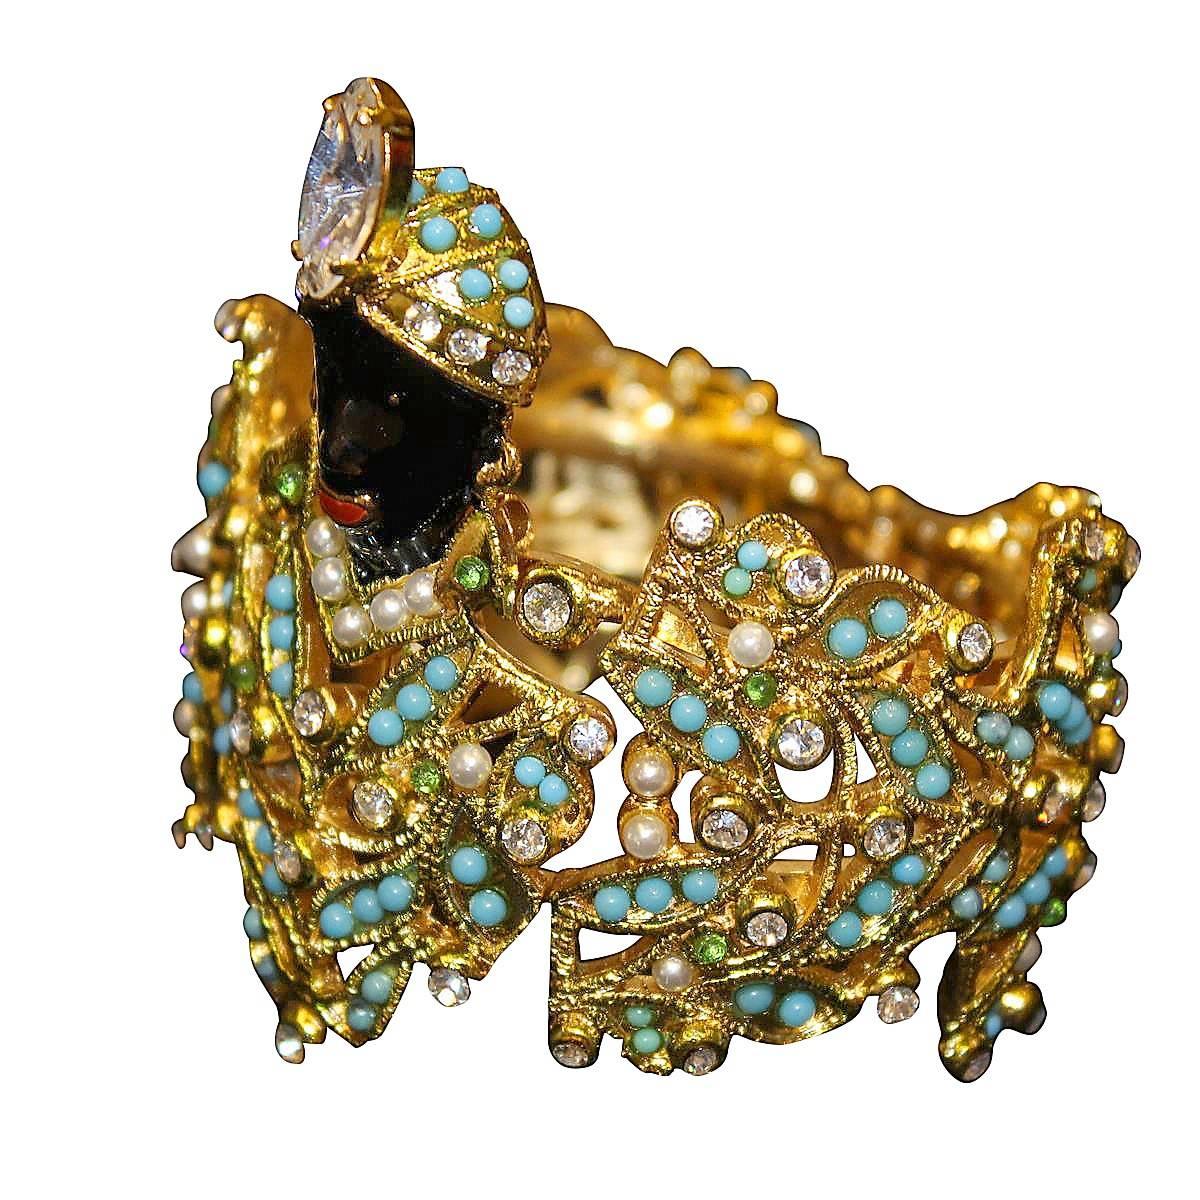 Unbelievable bracelet by one of the world's greatest designers, Carlo Zini
Mervellous bracelet on the Venetian moro theme
Non allergenic rhodium
18 KT gold dipped 
Wonderful construction of swarovsky crystals, beads and multicolored resins
100%